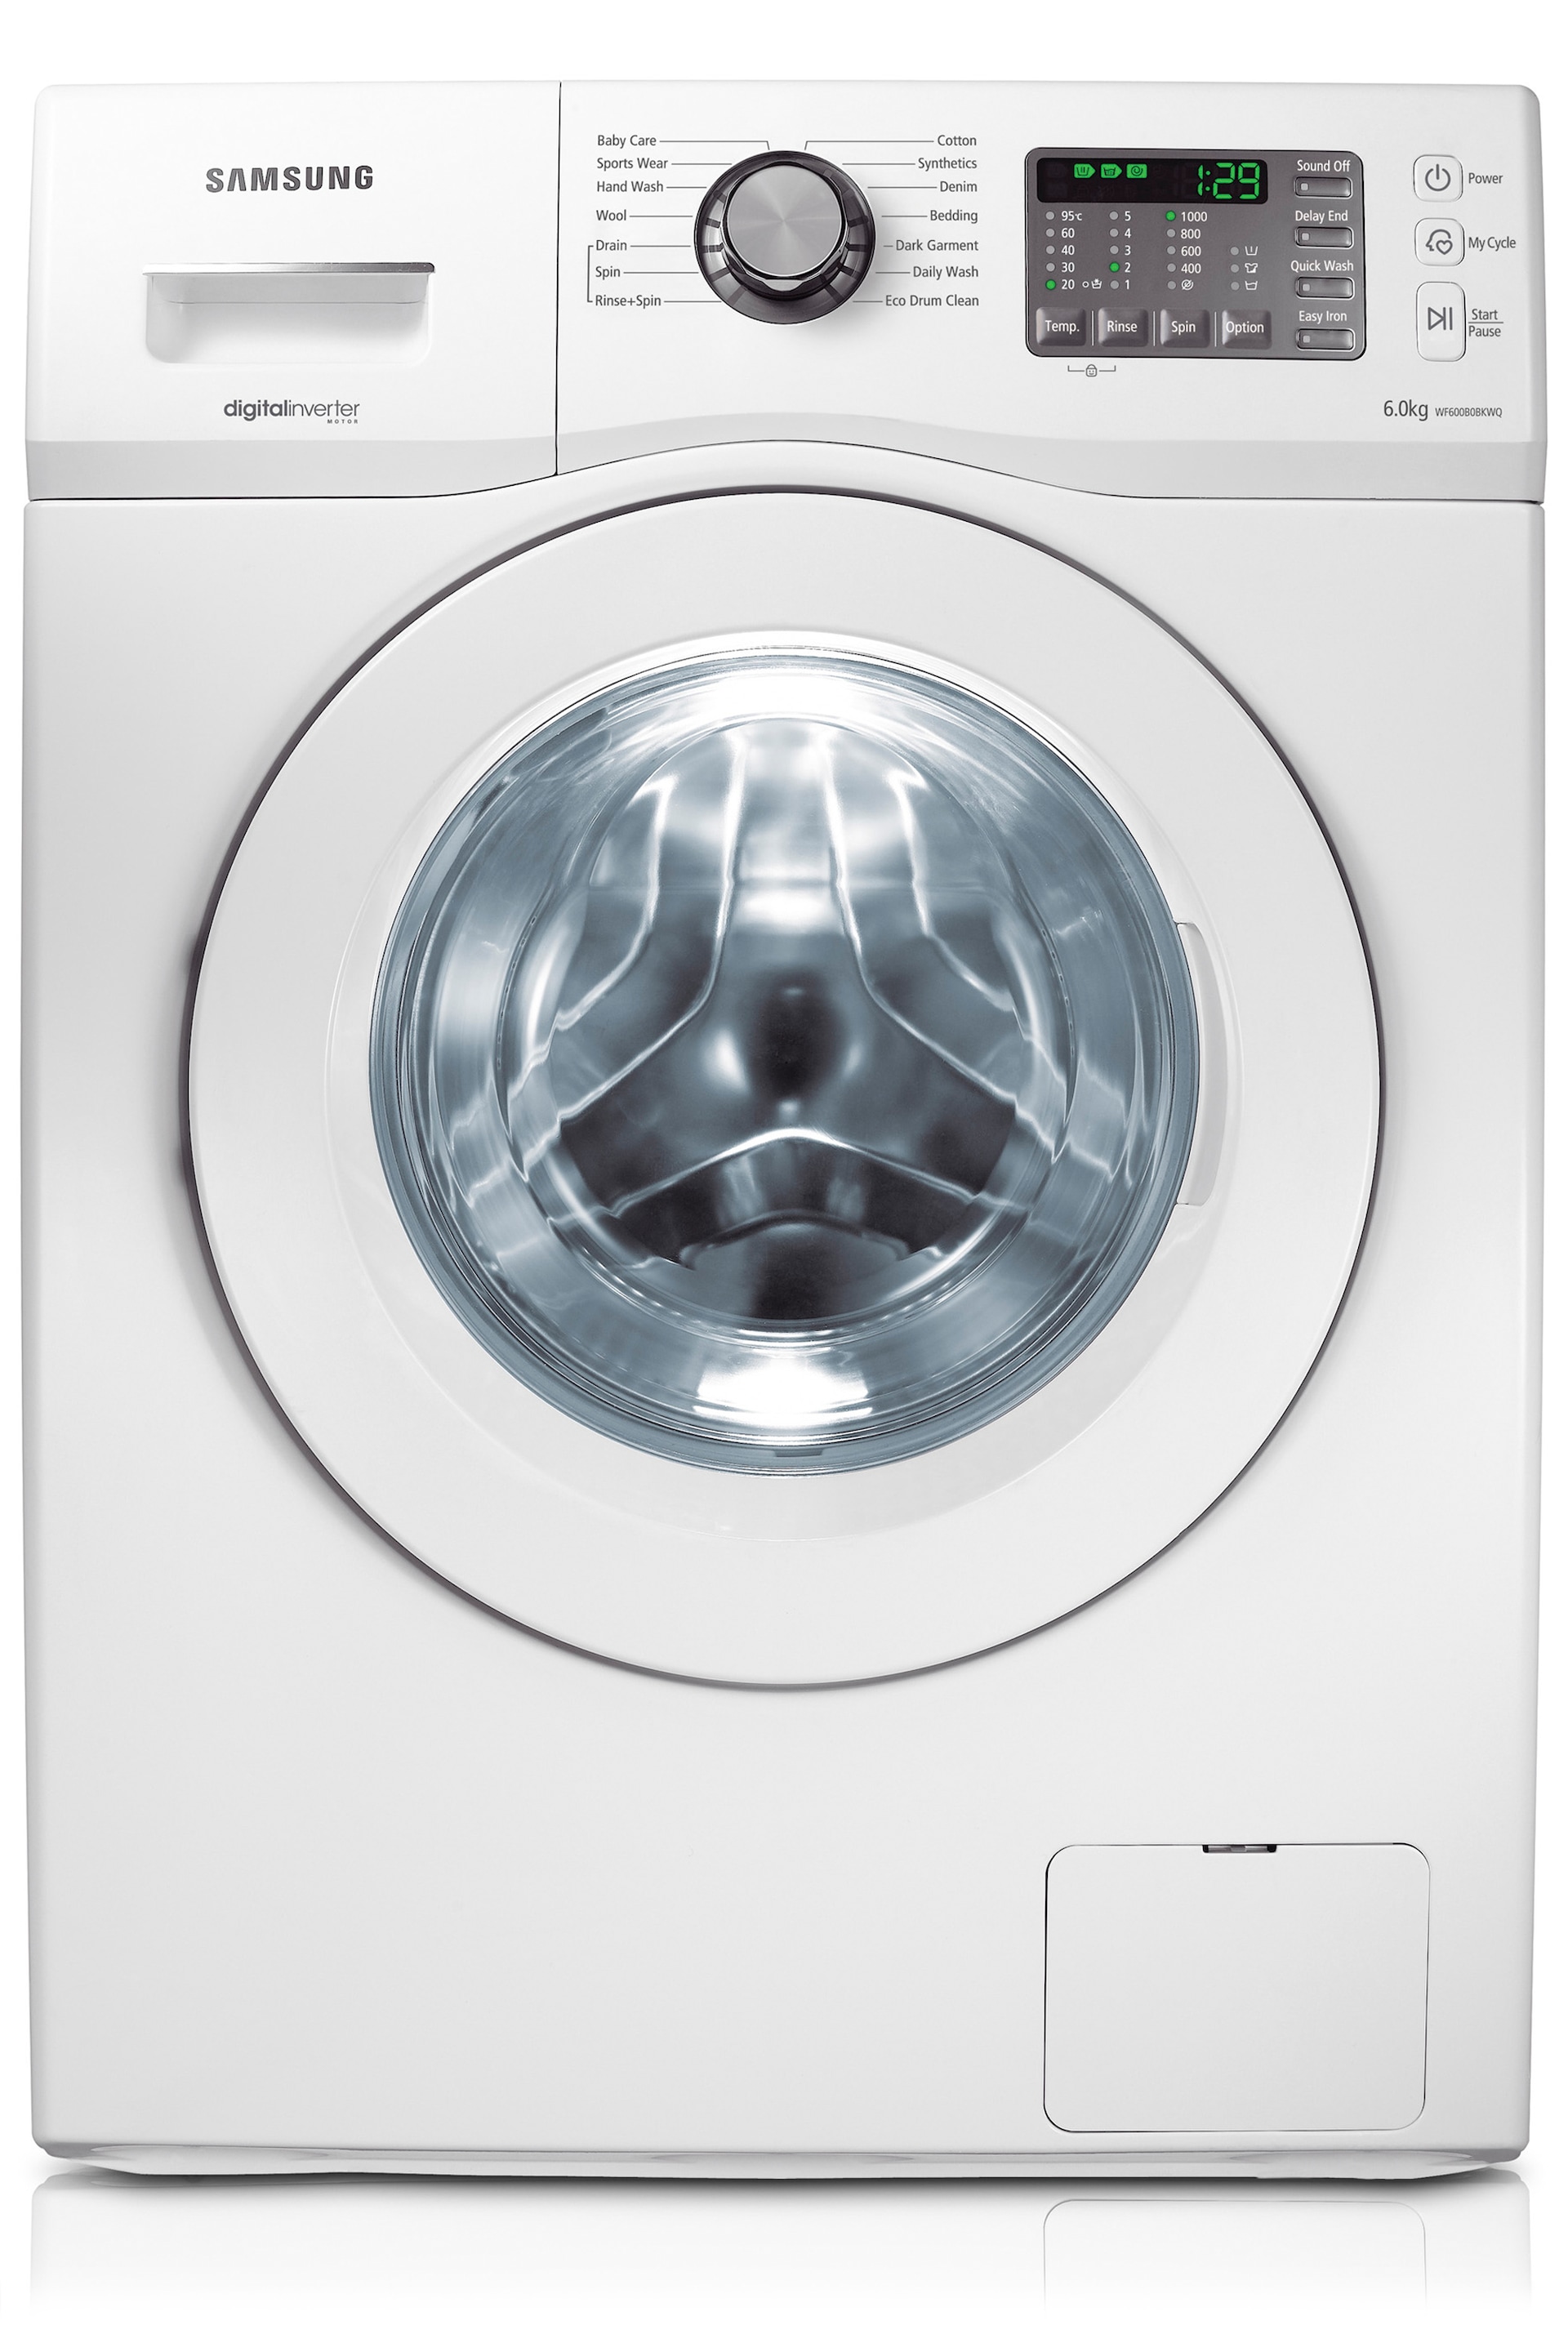 Samsung Fully Automatic Front Load Washing Machine User Manual